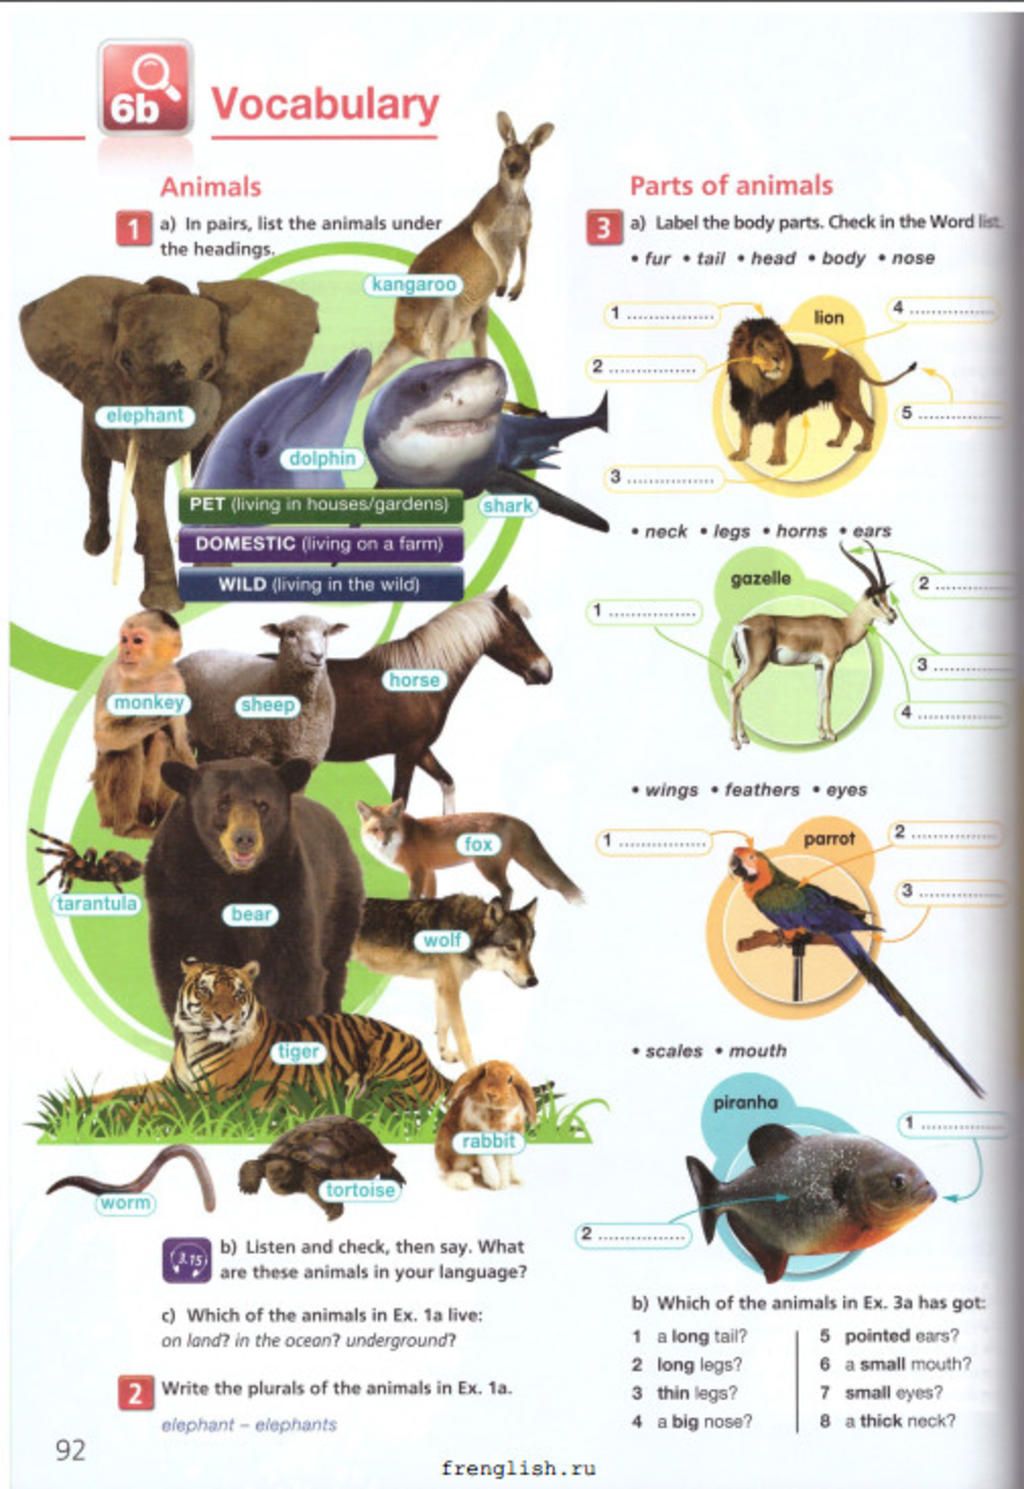 6b Vocabulary Animals Parts of animals 1a) In pairs, list the animals under  the headings. 3 a) Label the body parts. Check in the Word list • fur •  tail •